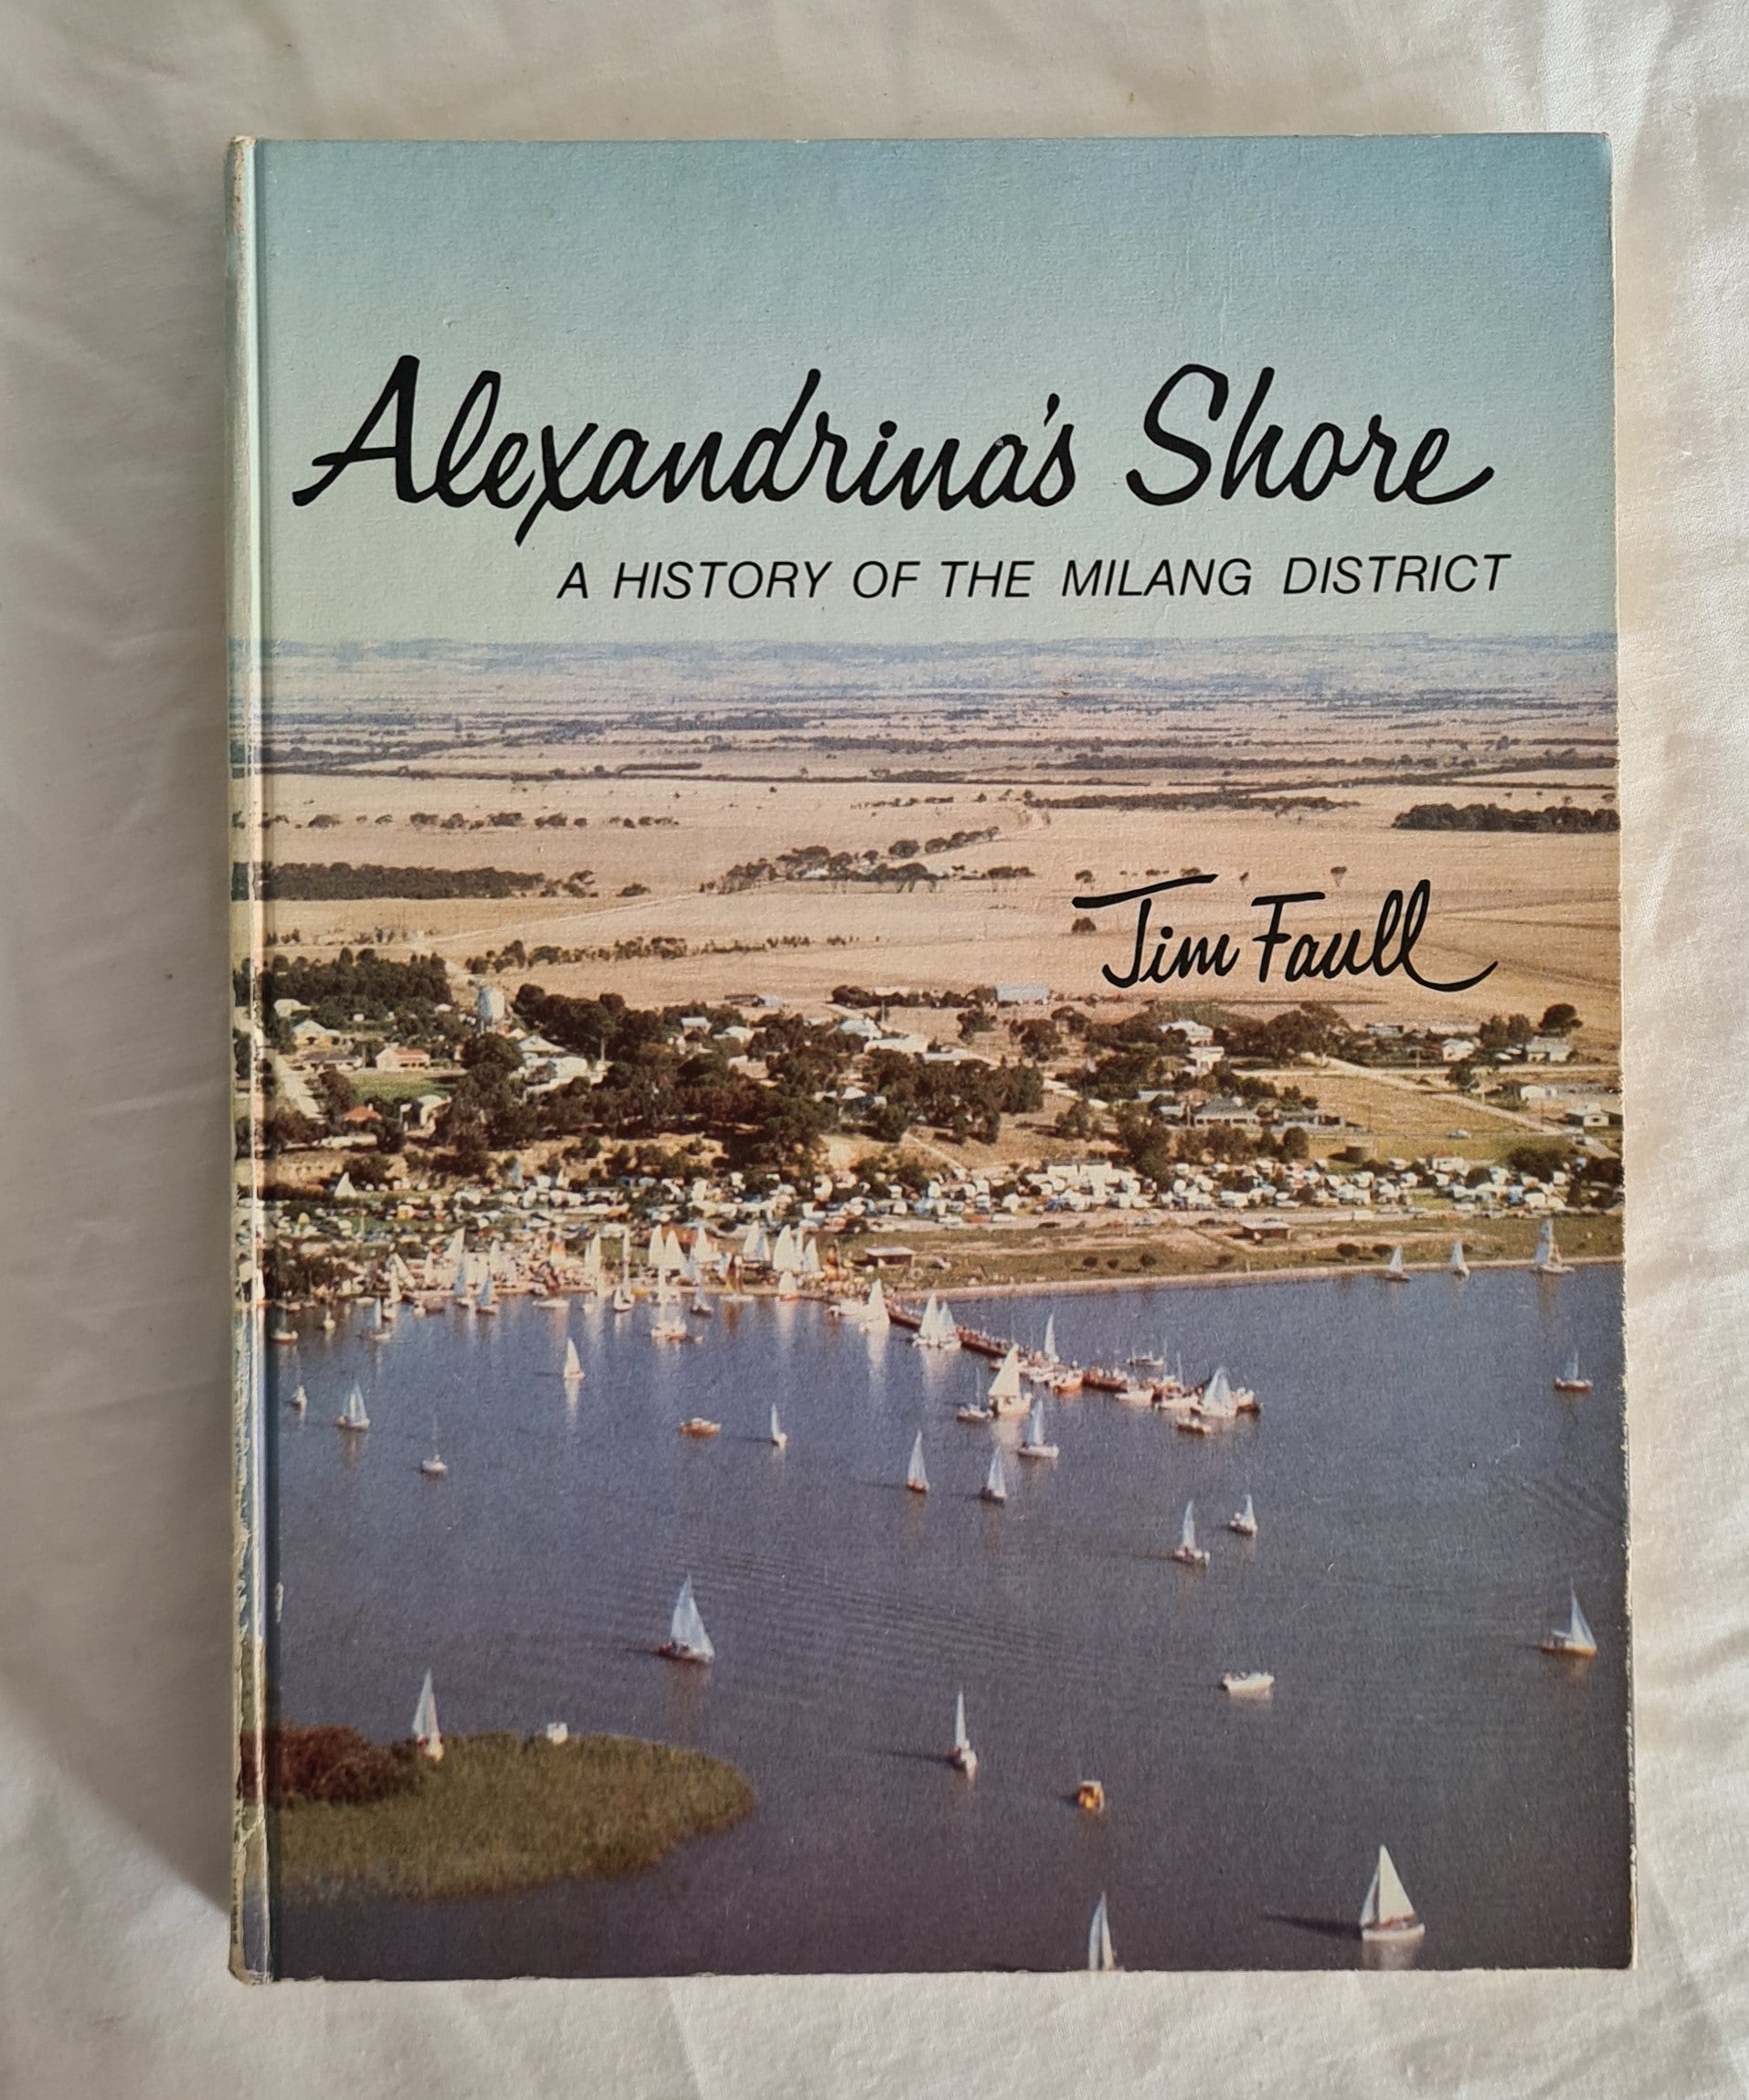 Alexandrina’s Shore  A History of the Milang District  Edited by Jim Faull